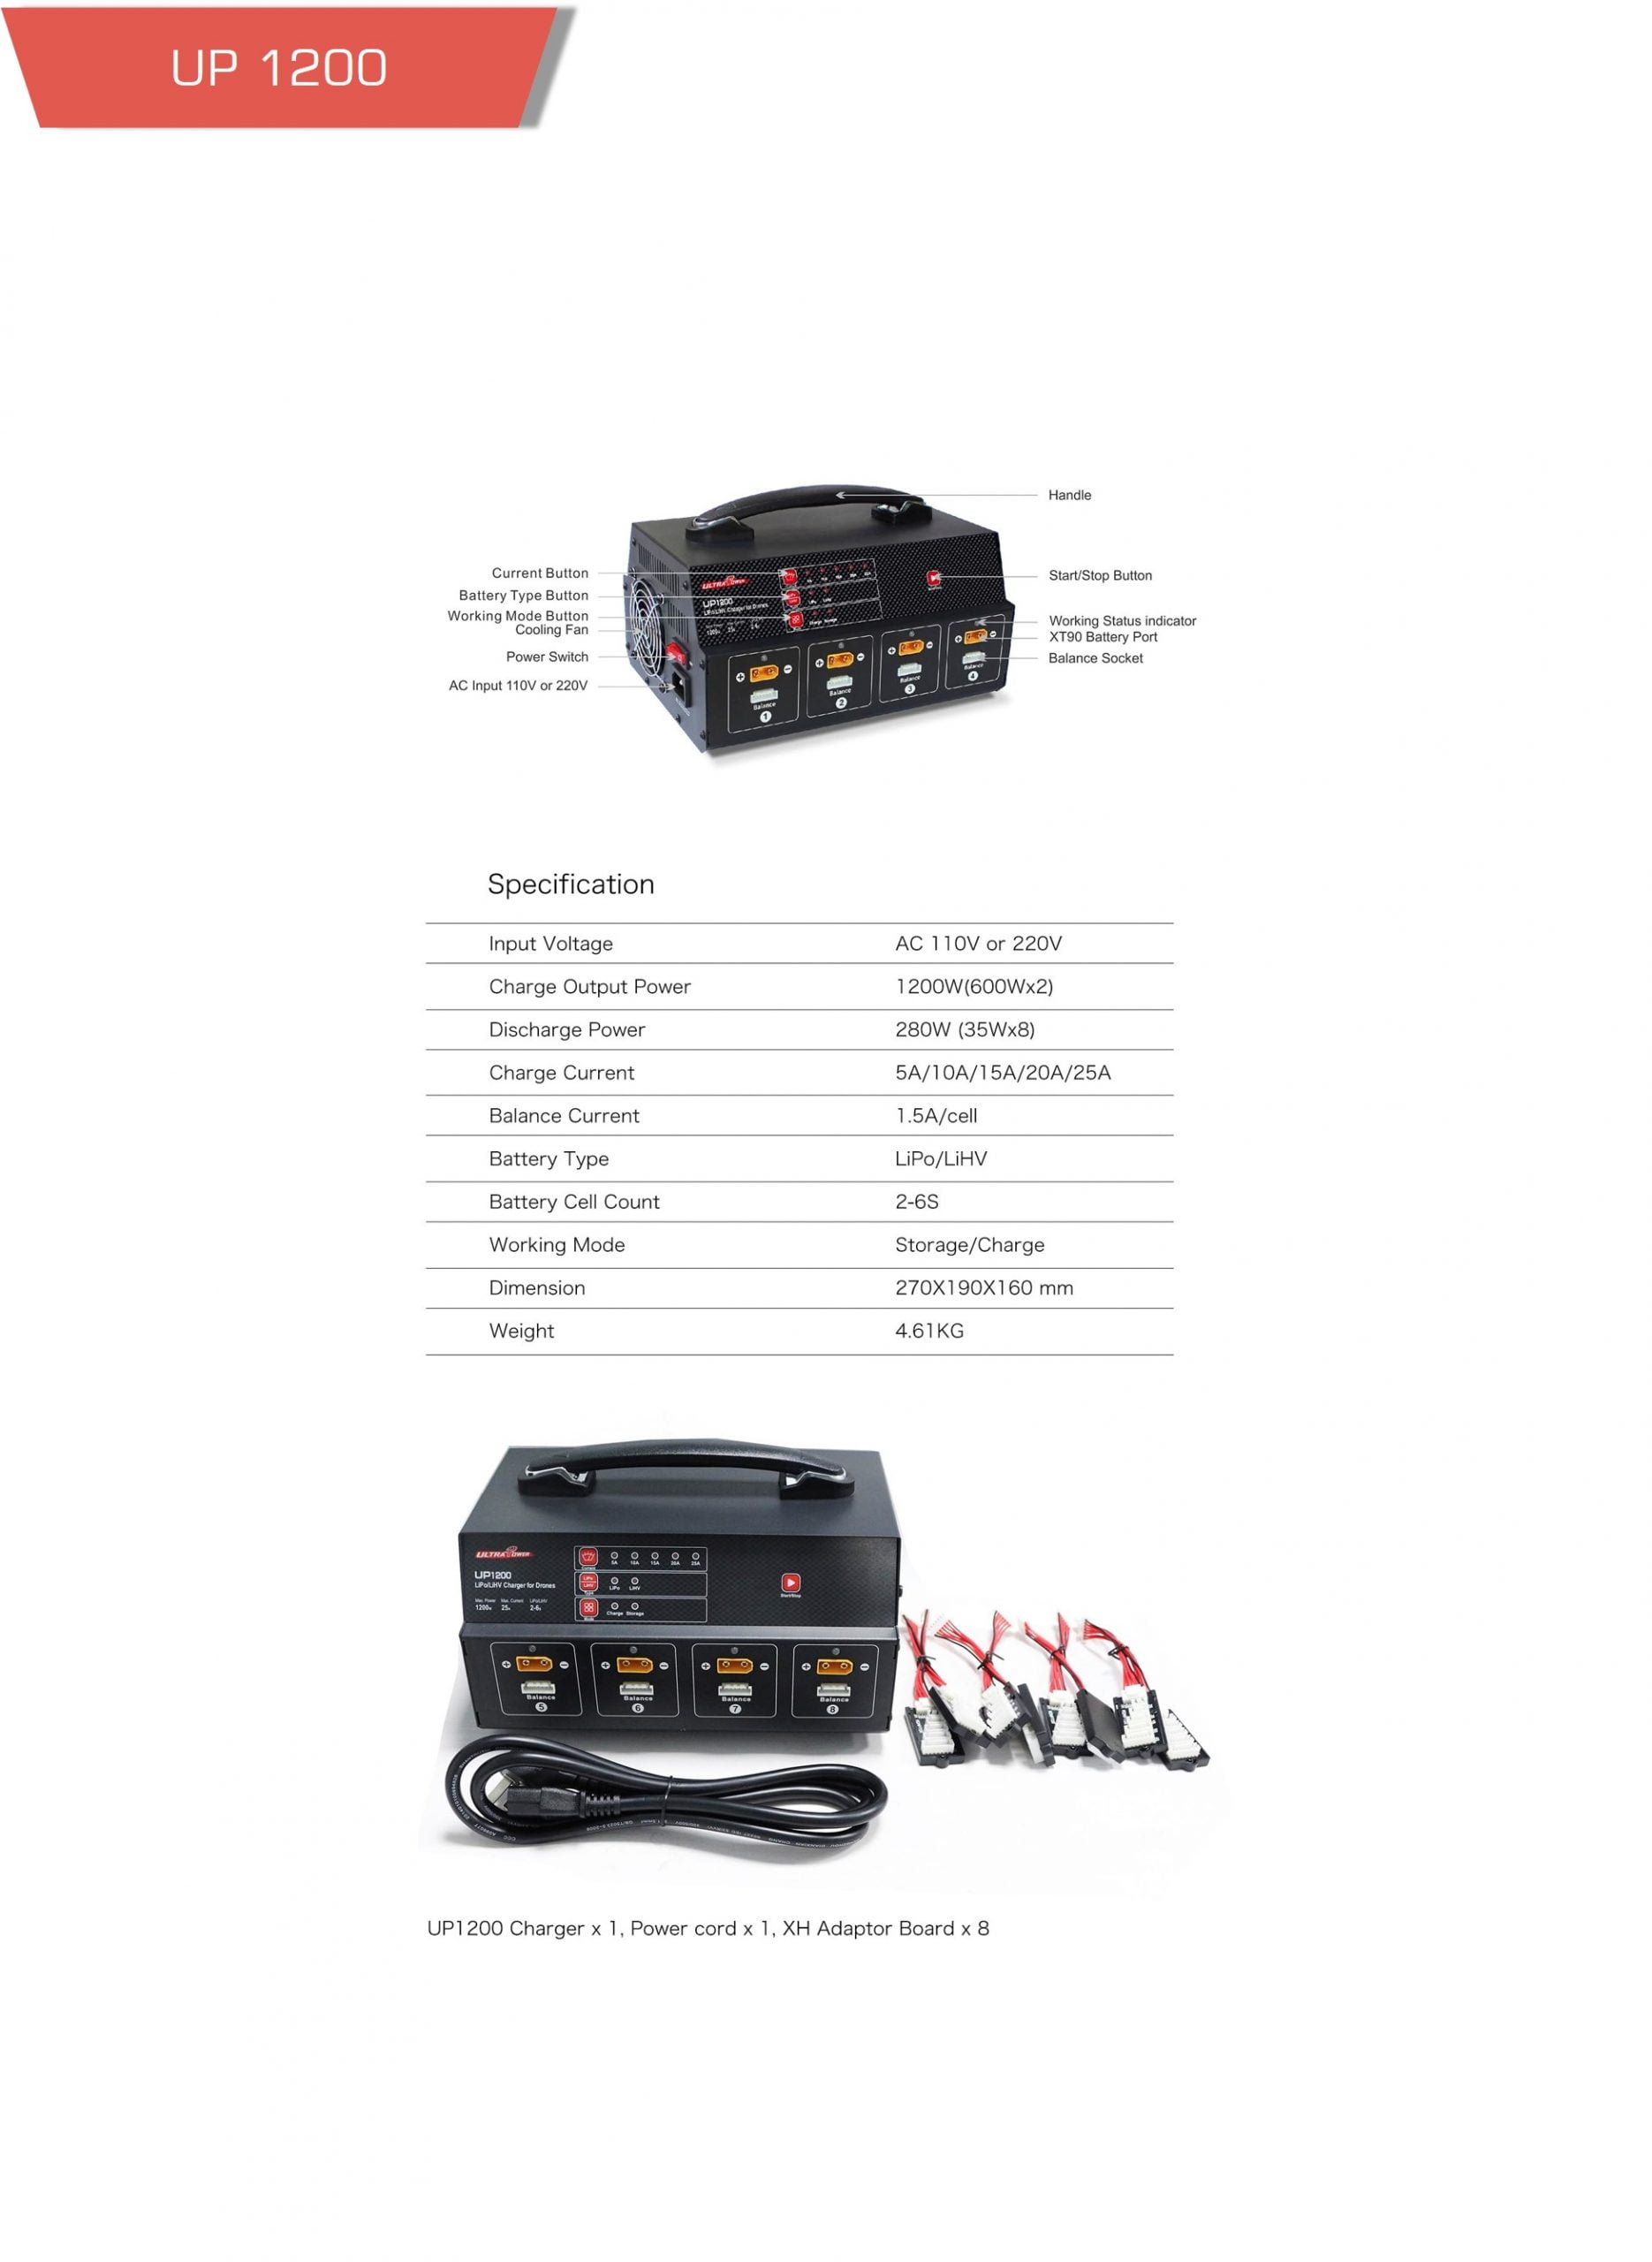 Liul scaled - up1200, 1200w charger, intelligent charger - motionew - 7